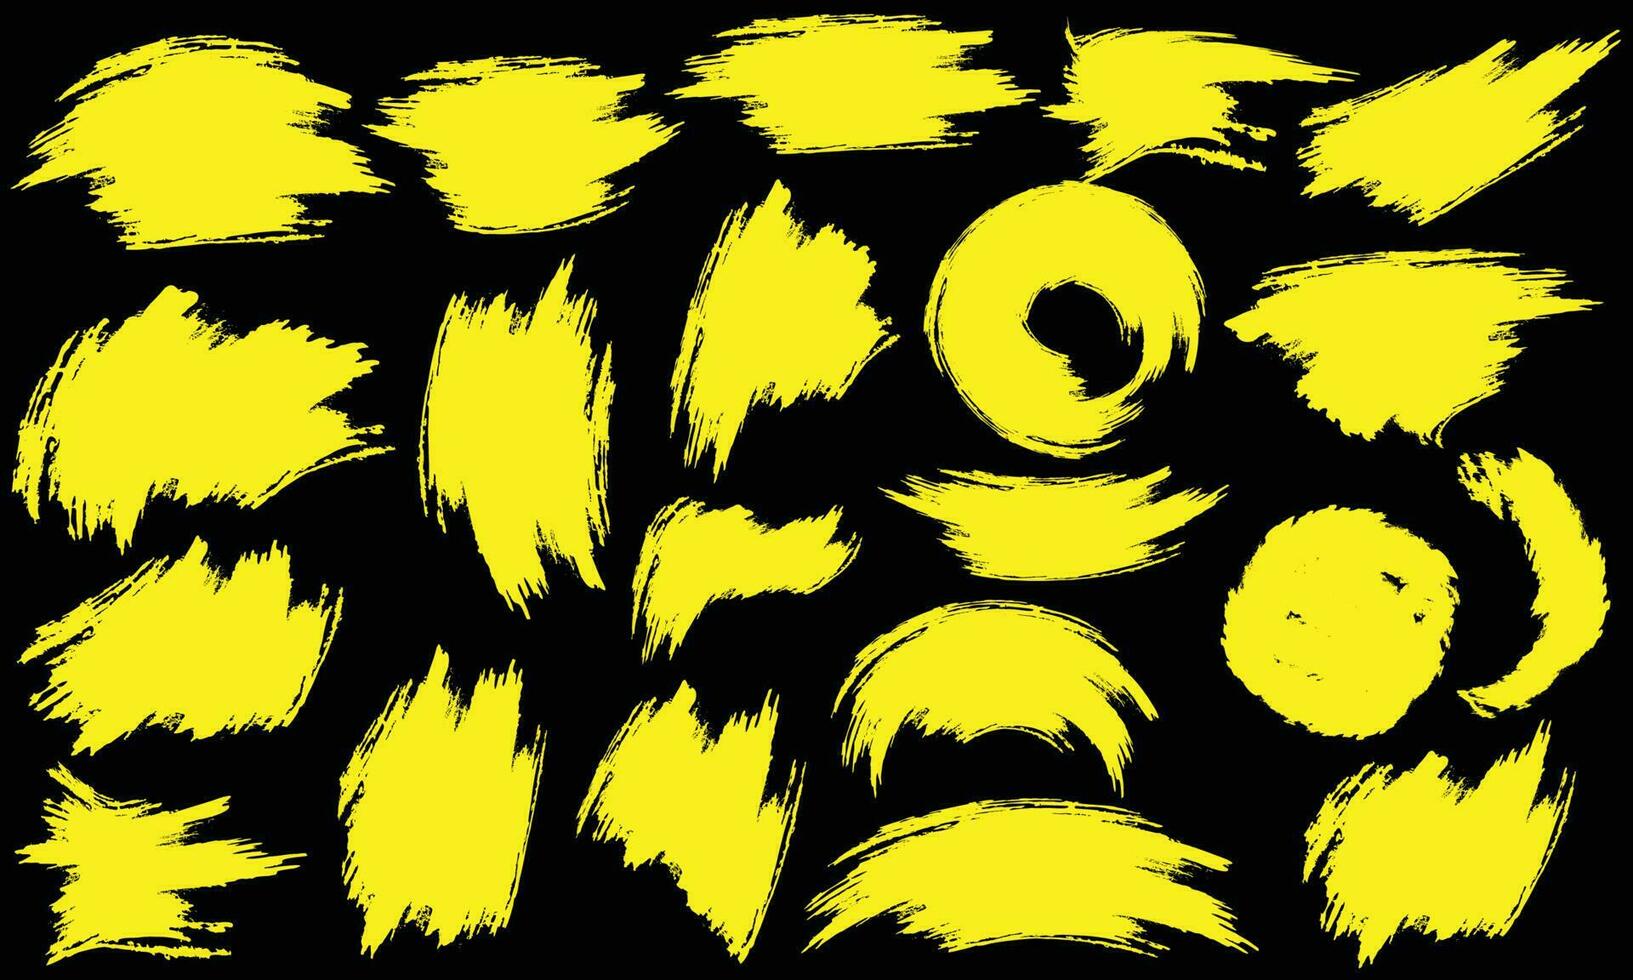 Abstract yellow color grunge brush stroke design big collection vector